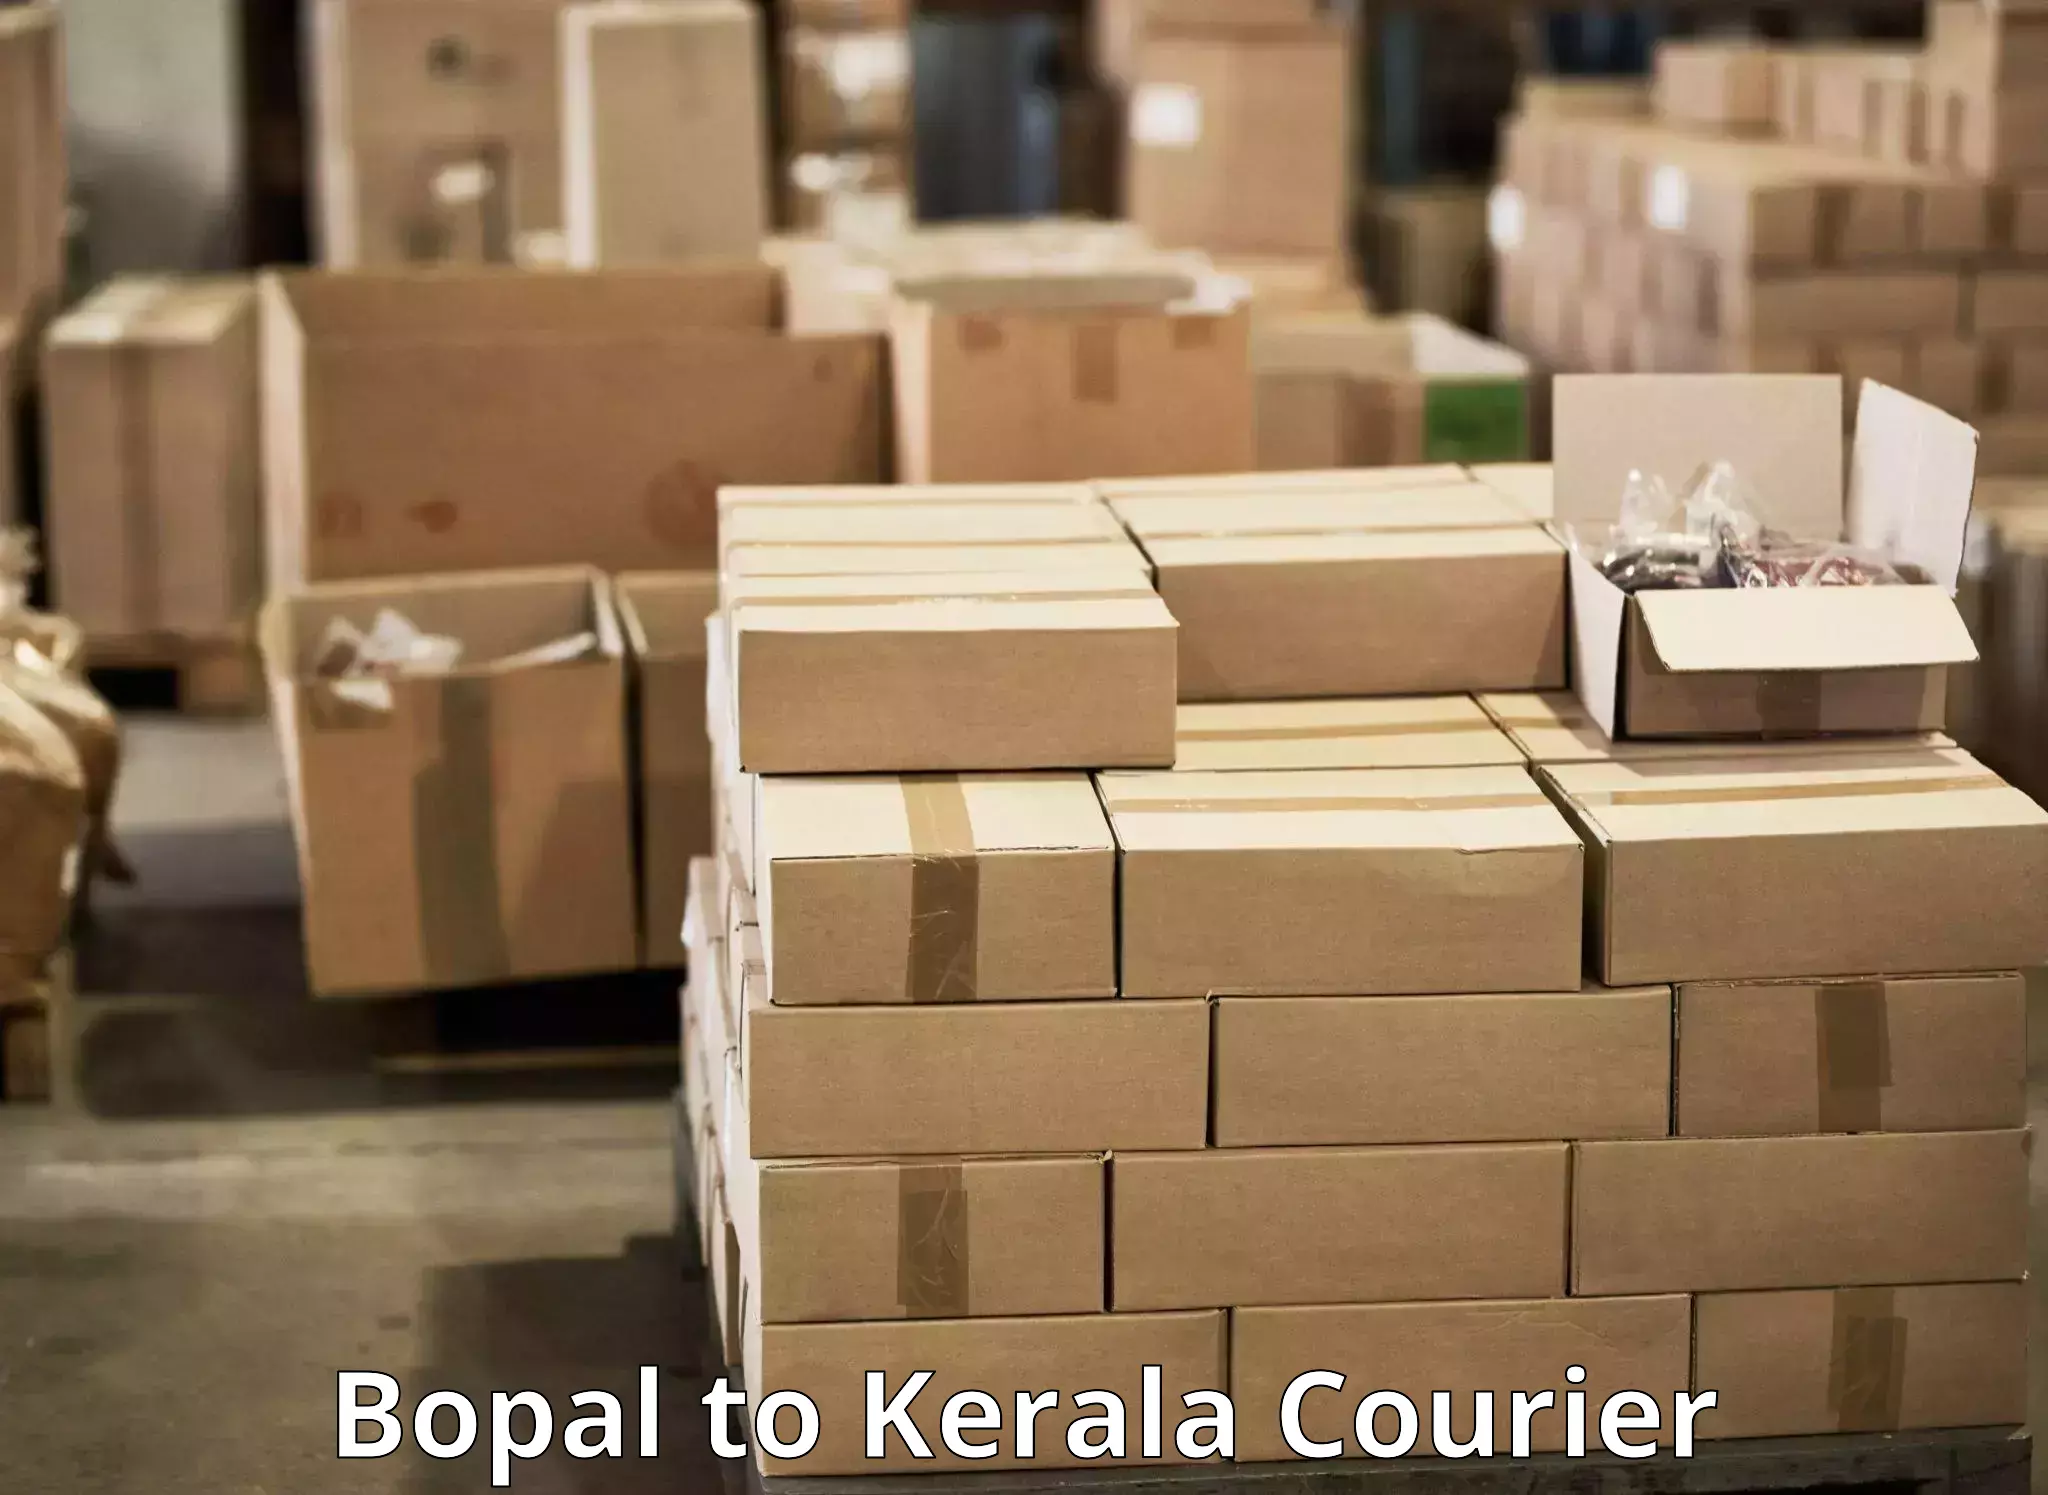 Courier dispatch services in Bopal to Cochin Port Kochi